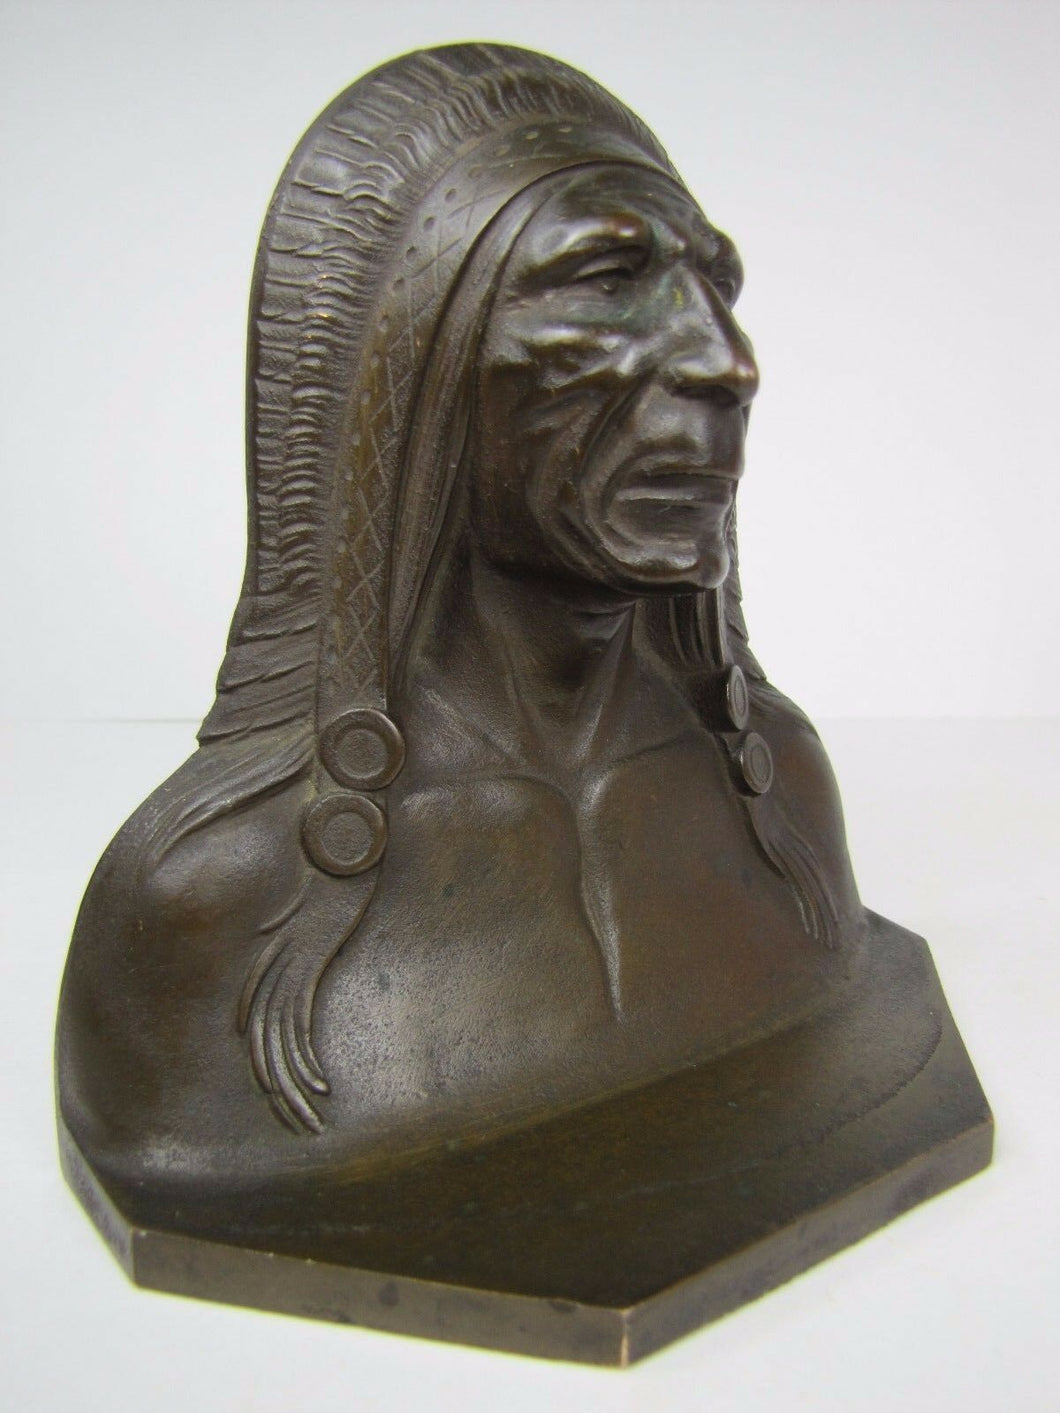 Antique Indian Chief Bronze Brass Decorative Art Bookend Doorstop made in USA